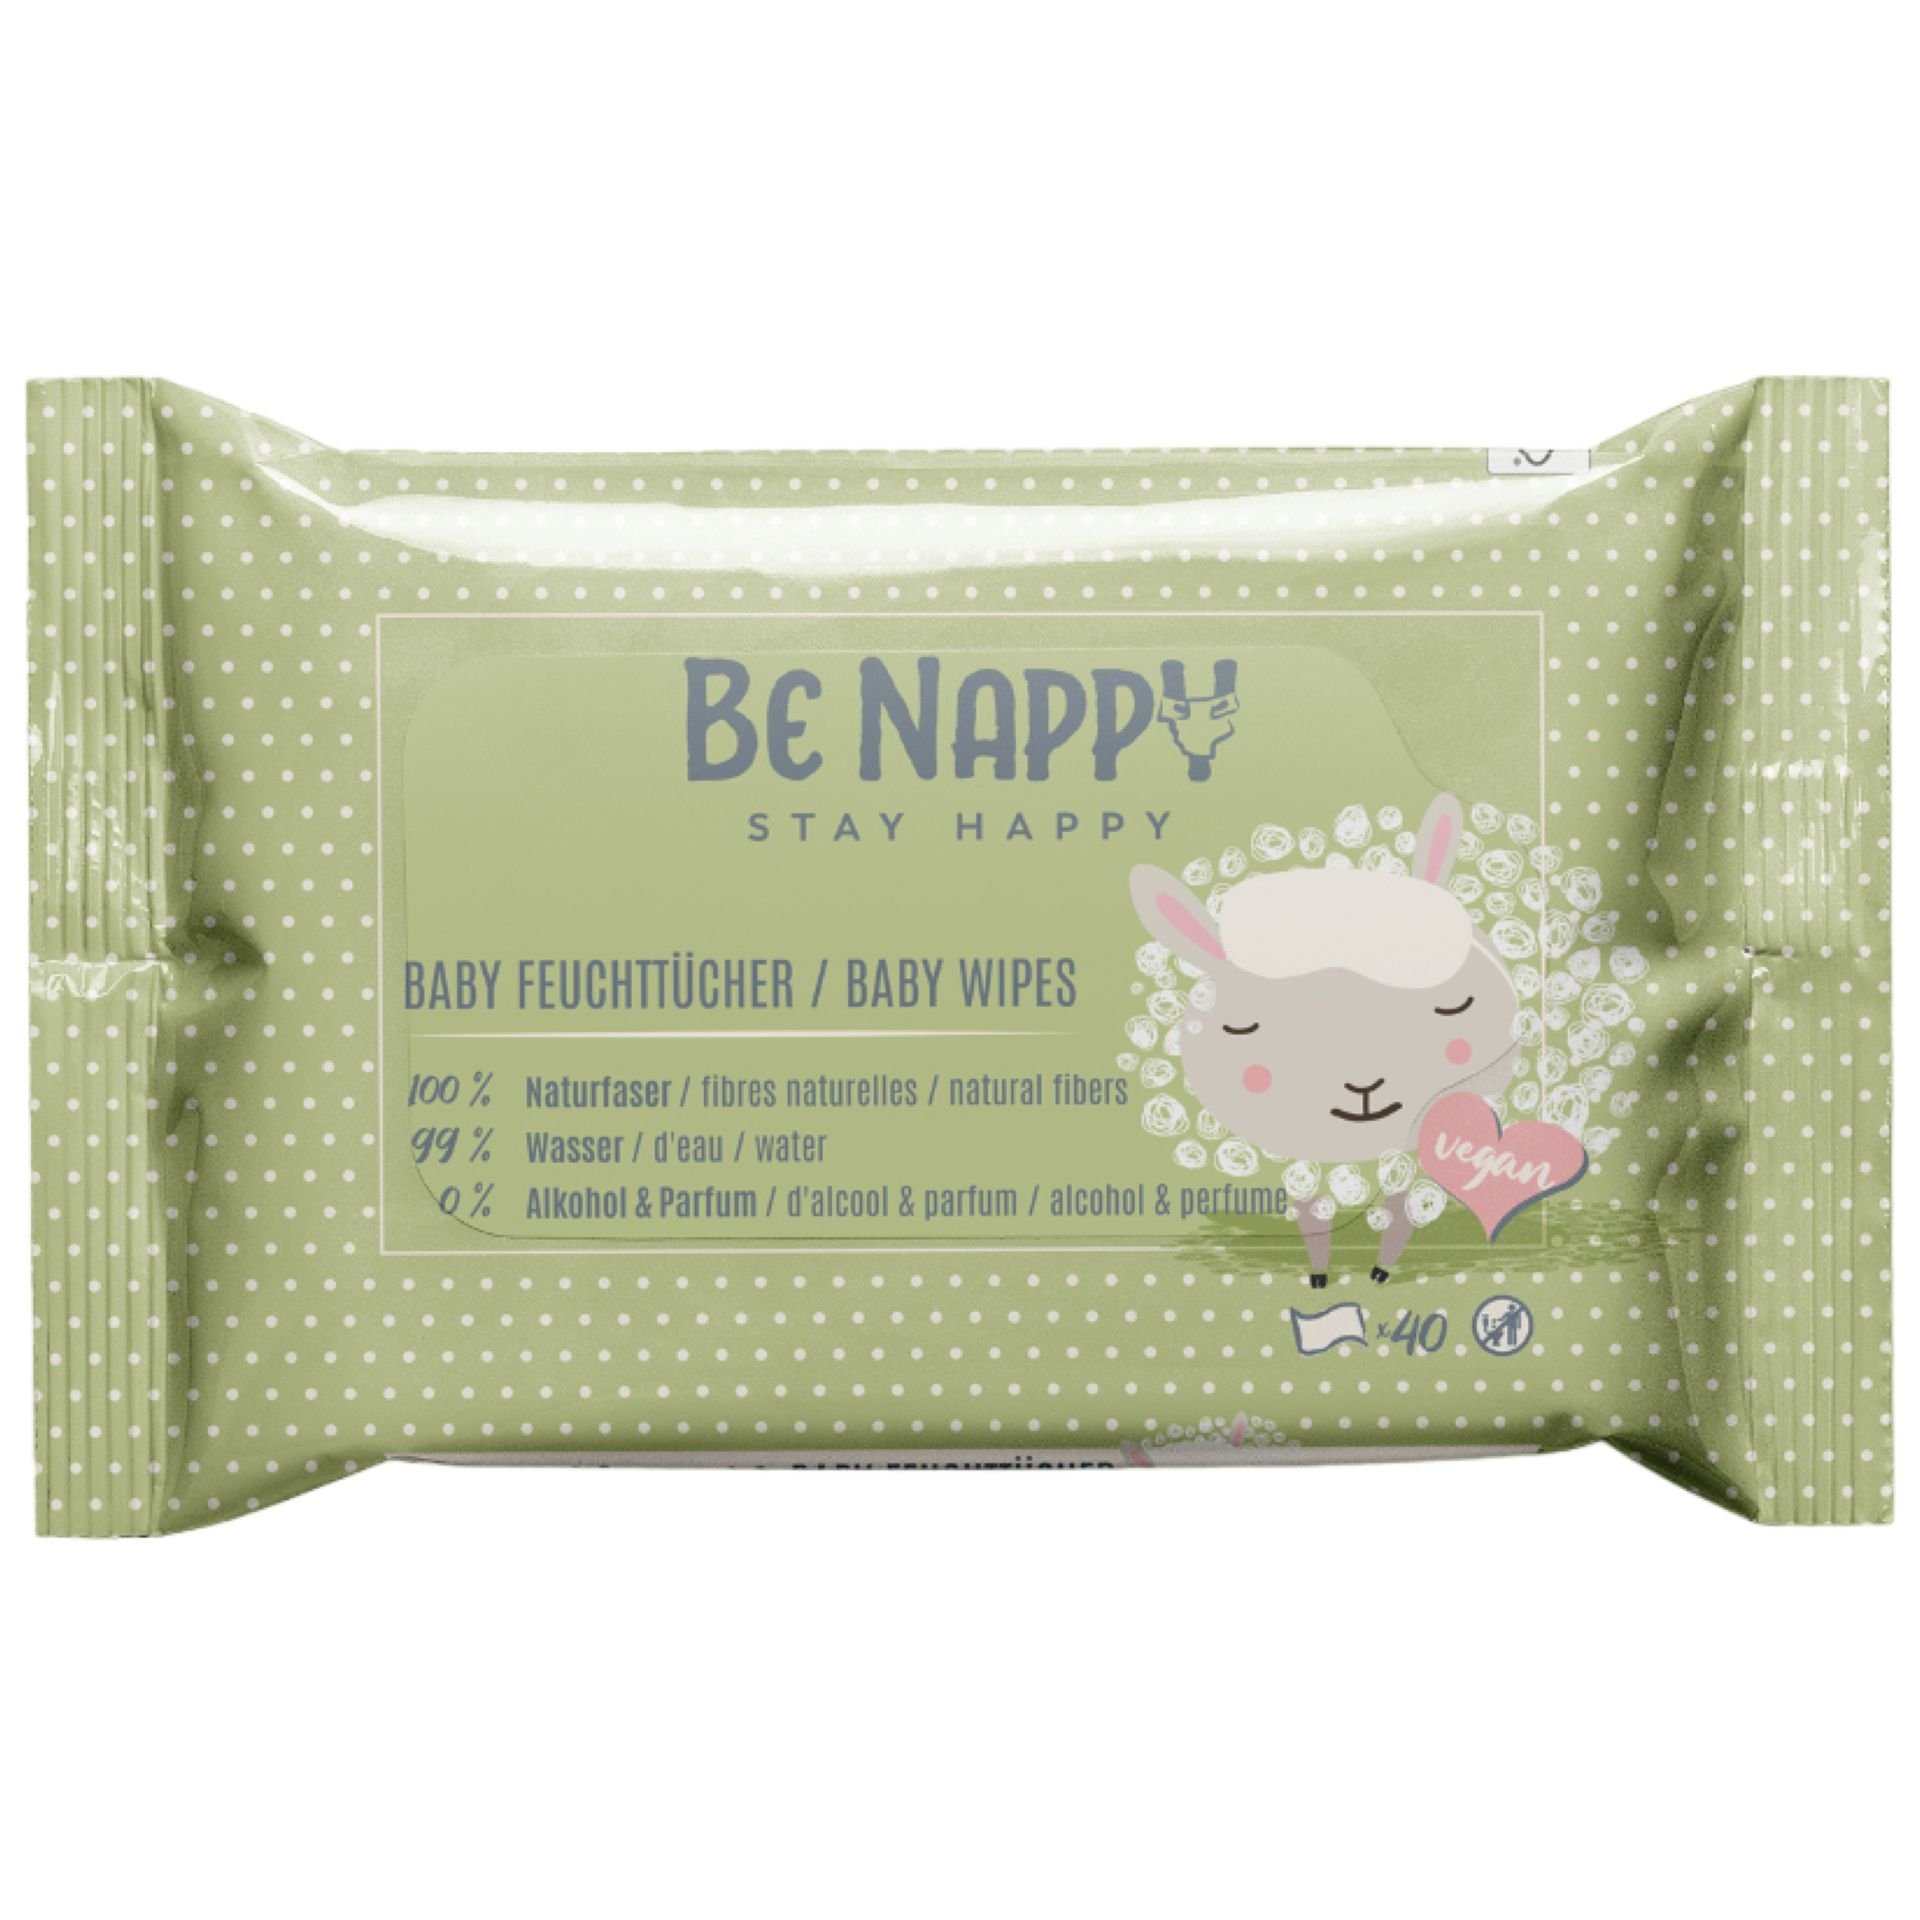 BE NAPPY Lingettes humides